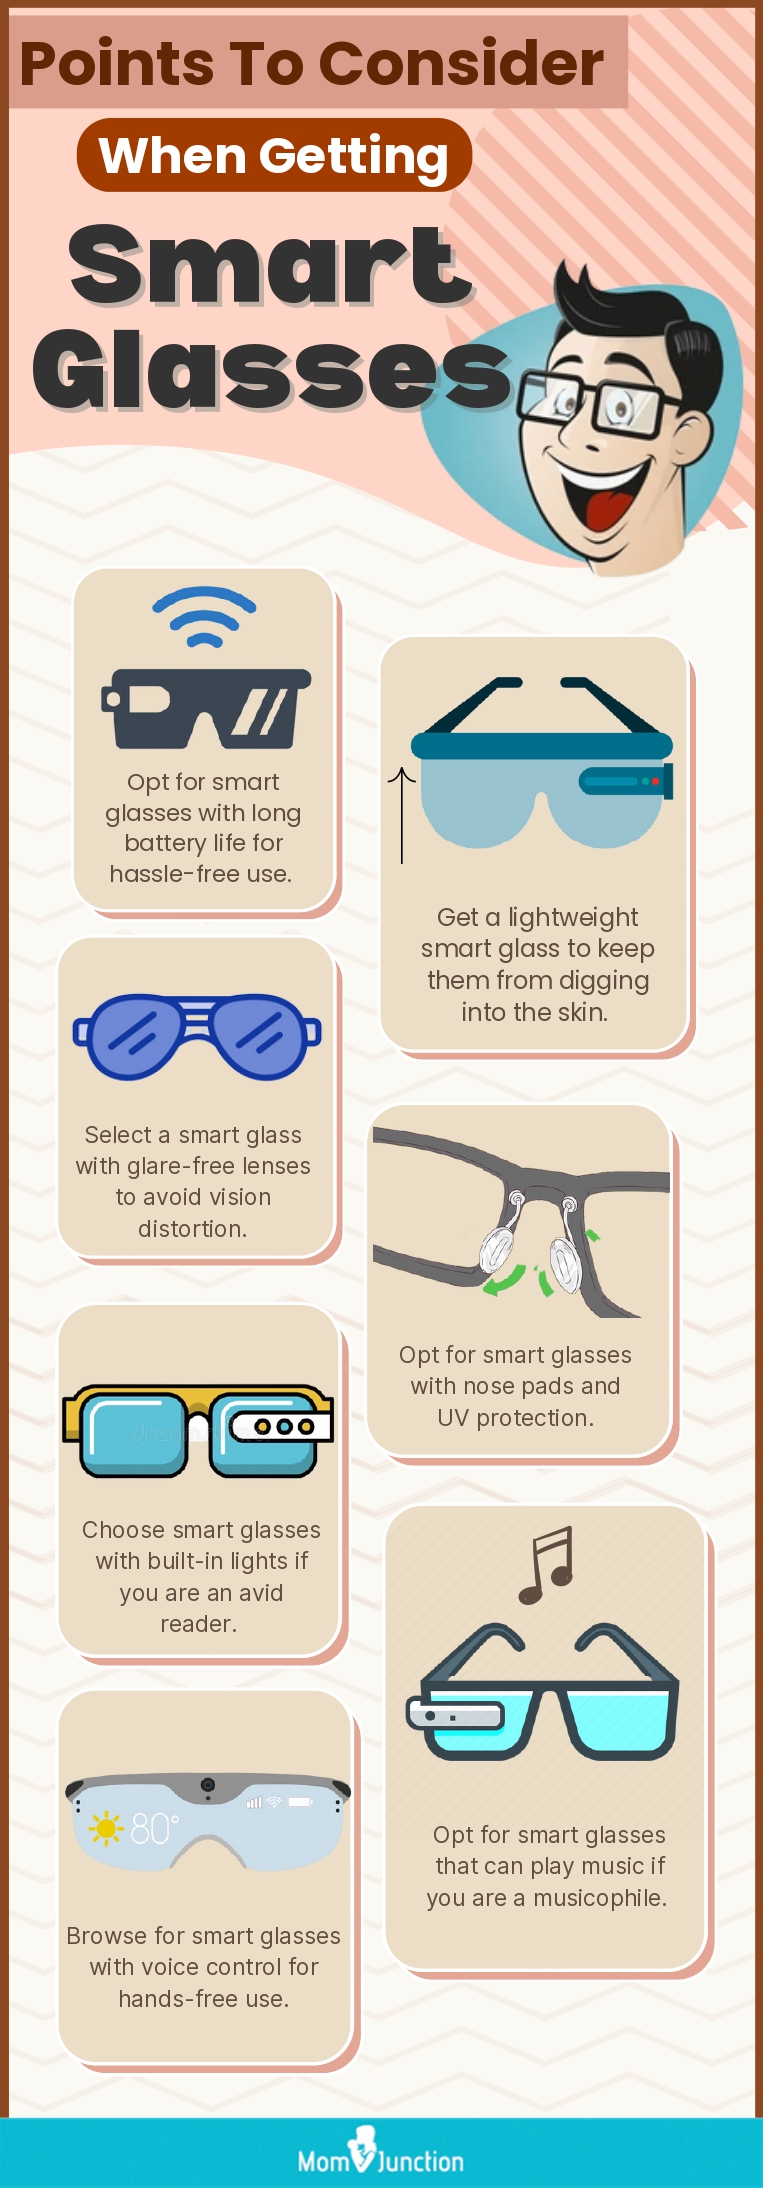 Points To Consider When Getting Smart Glasses (infographic)